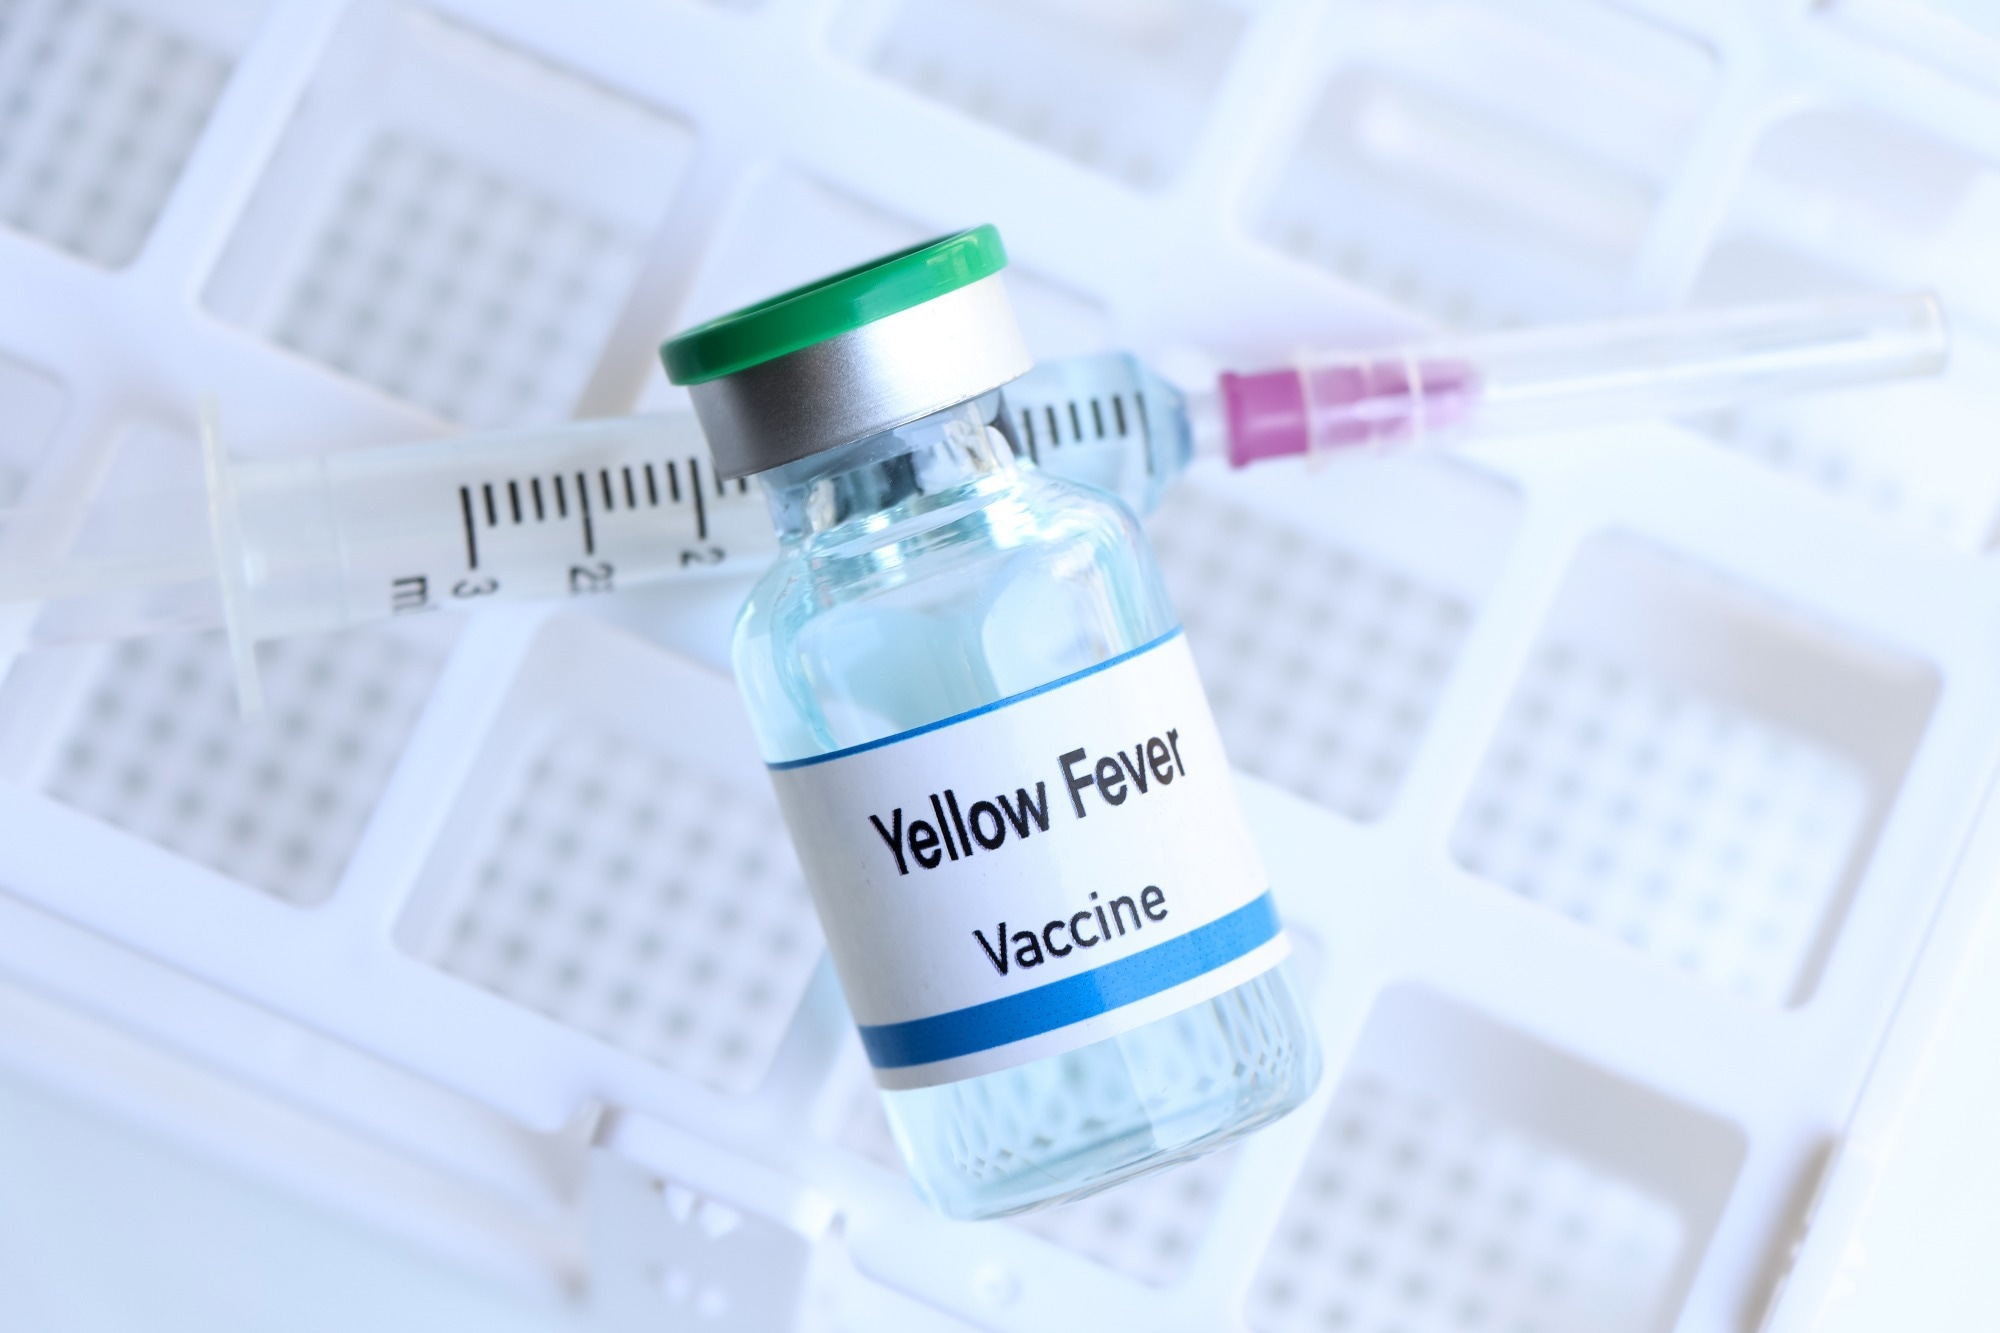 Study: Long-term immunity following yellow fever vaccination: a systematic review and meta-analysis. Image Credit: chemical industry/Shutterstock.com